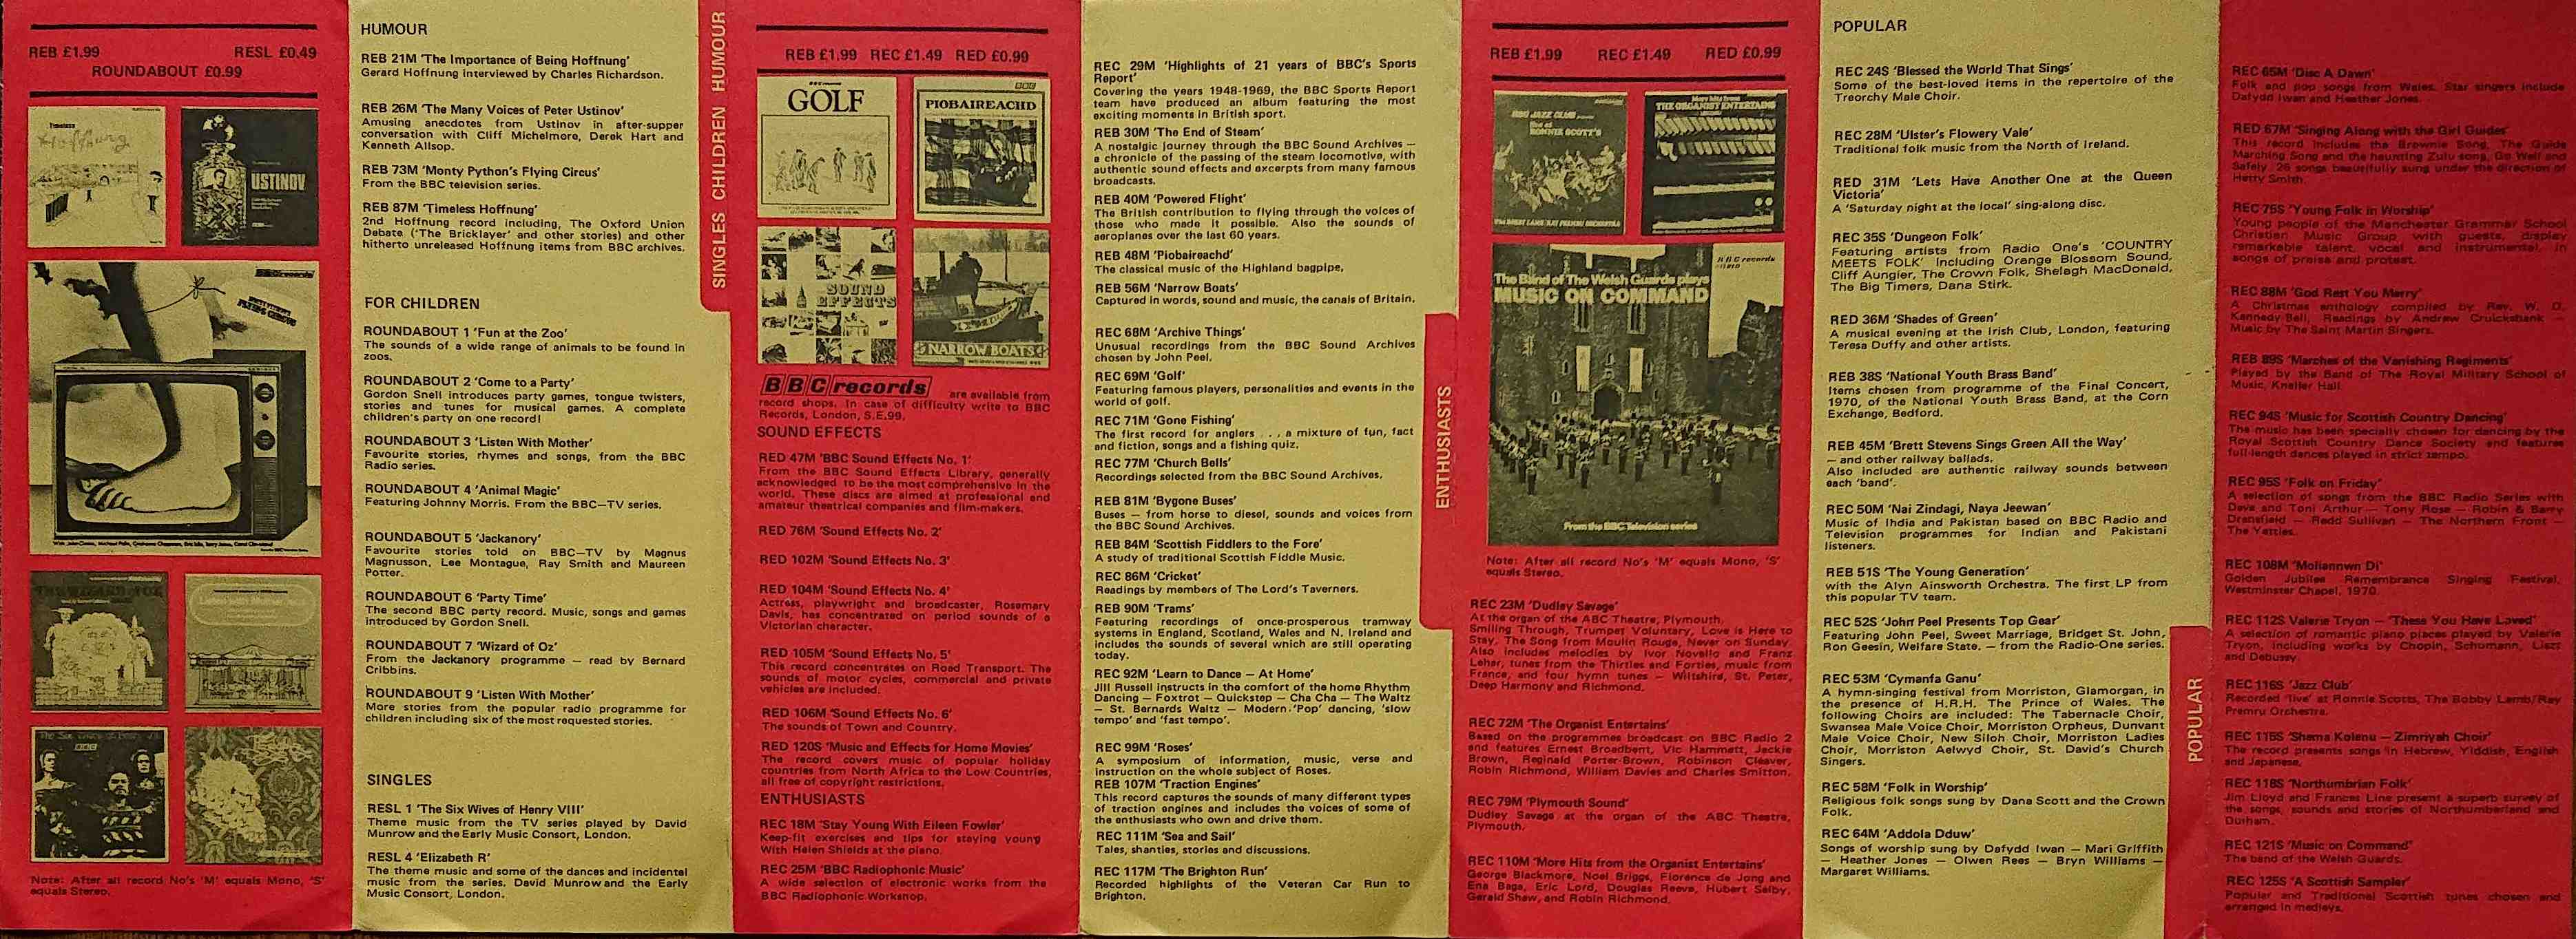 Other pages of catalogue BBC Records catalogue 1971